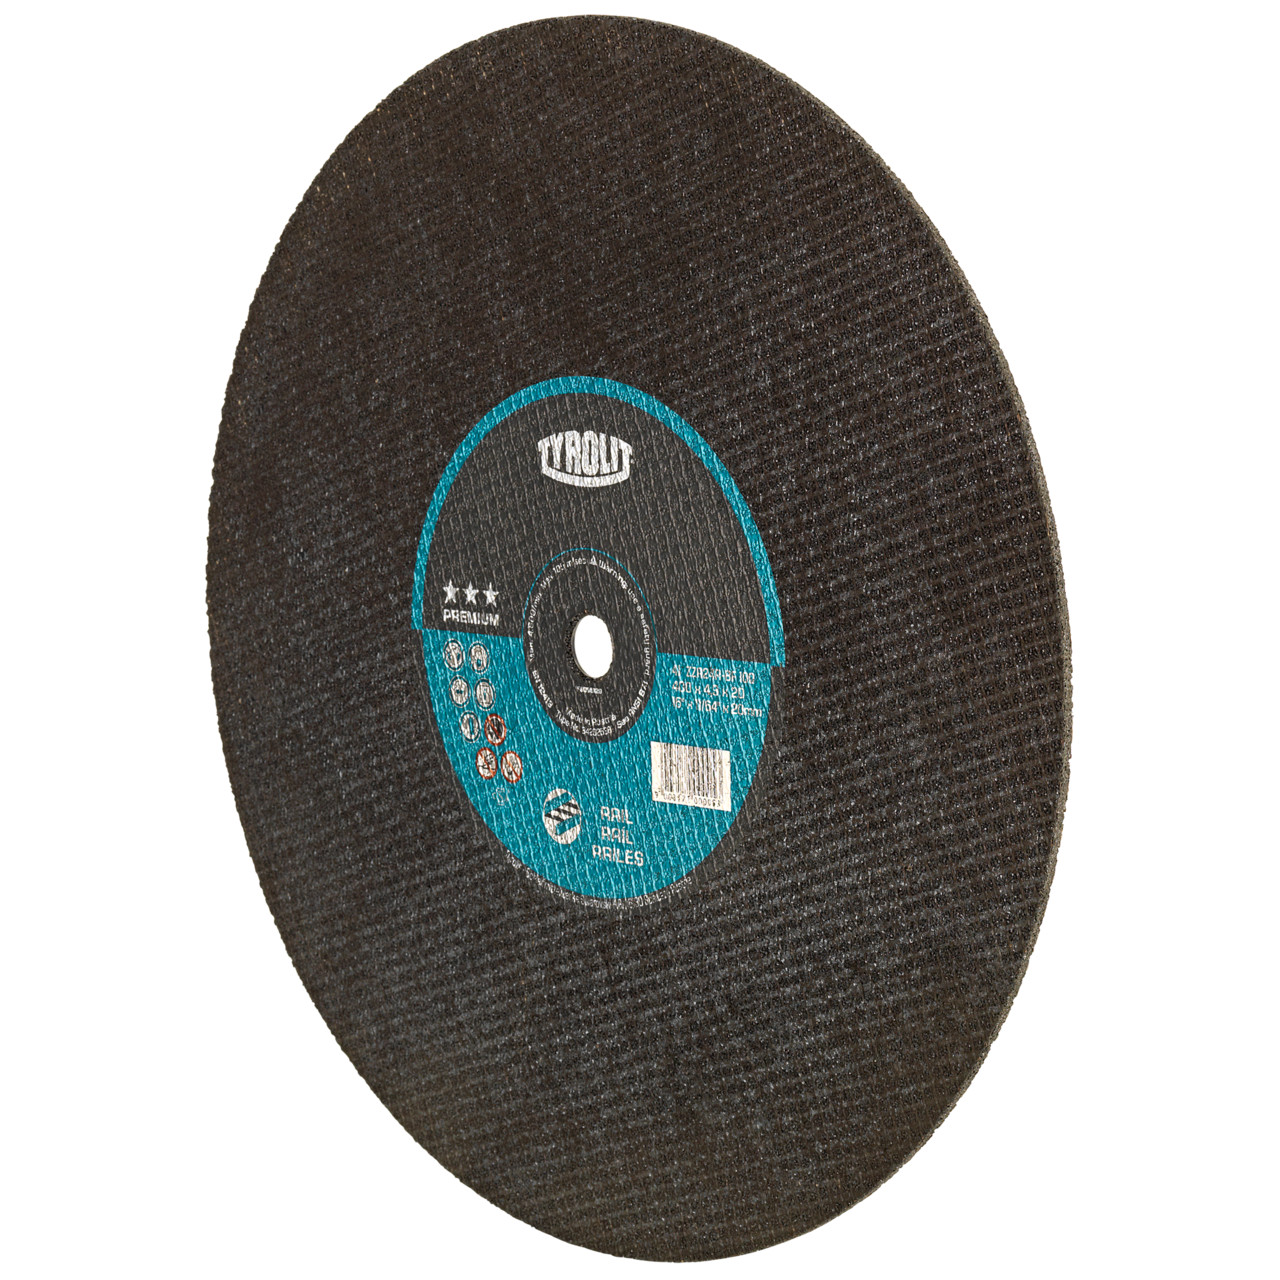 Tyrolit Cutting discs DxDxH 350x3.8x25.4 For rails for guided freehand cutting, shape: 41 - straight version, Art. 34202550